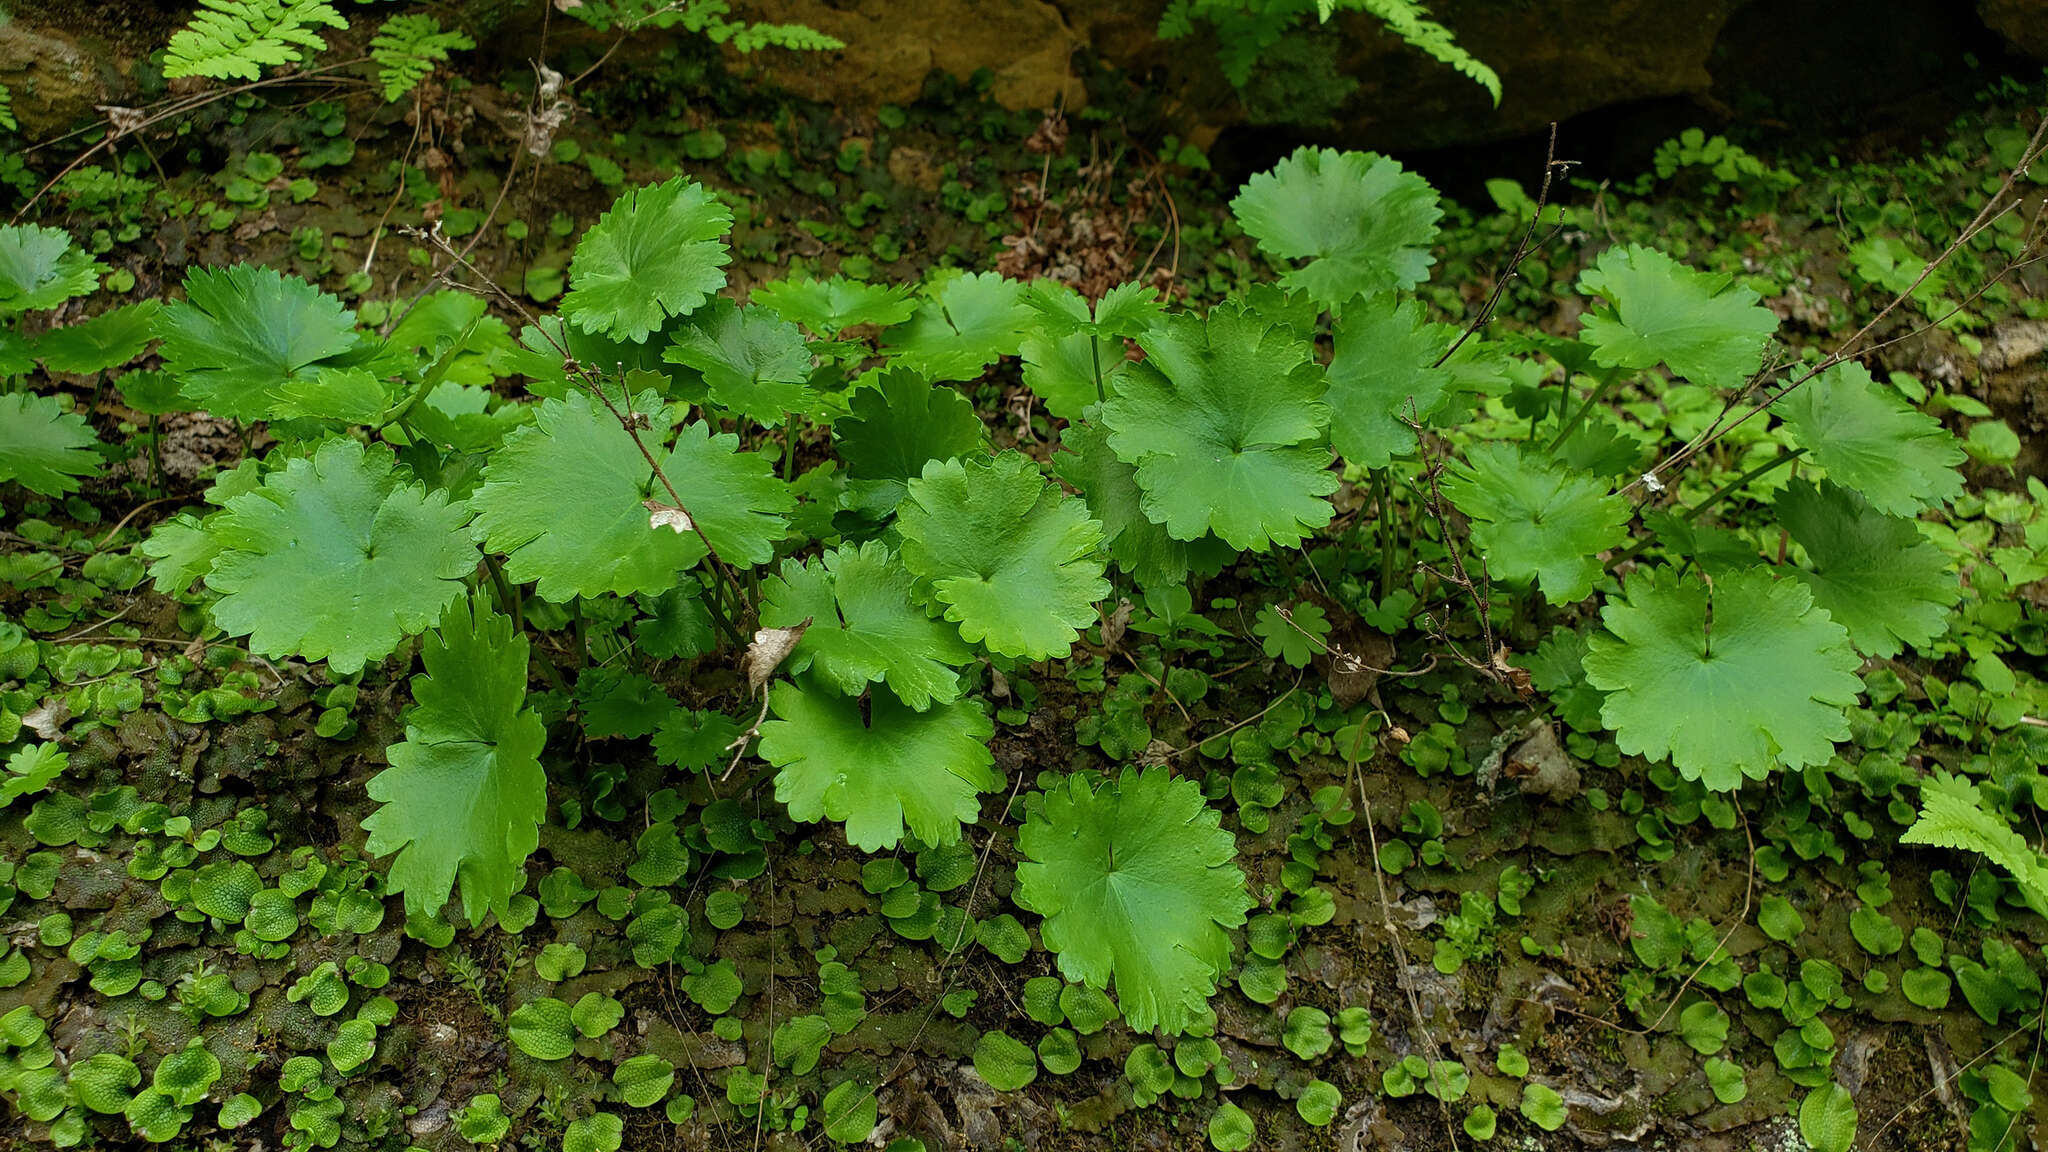 Image of Sullivant's coolwort